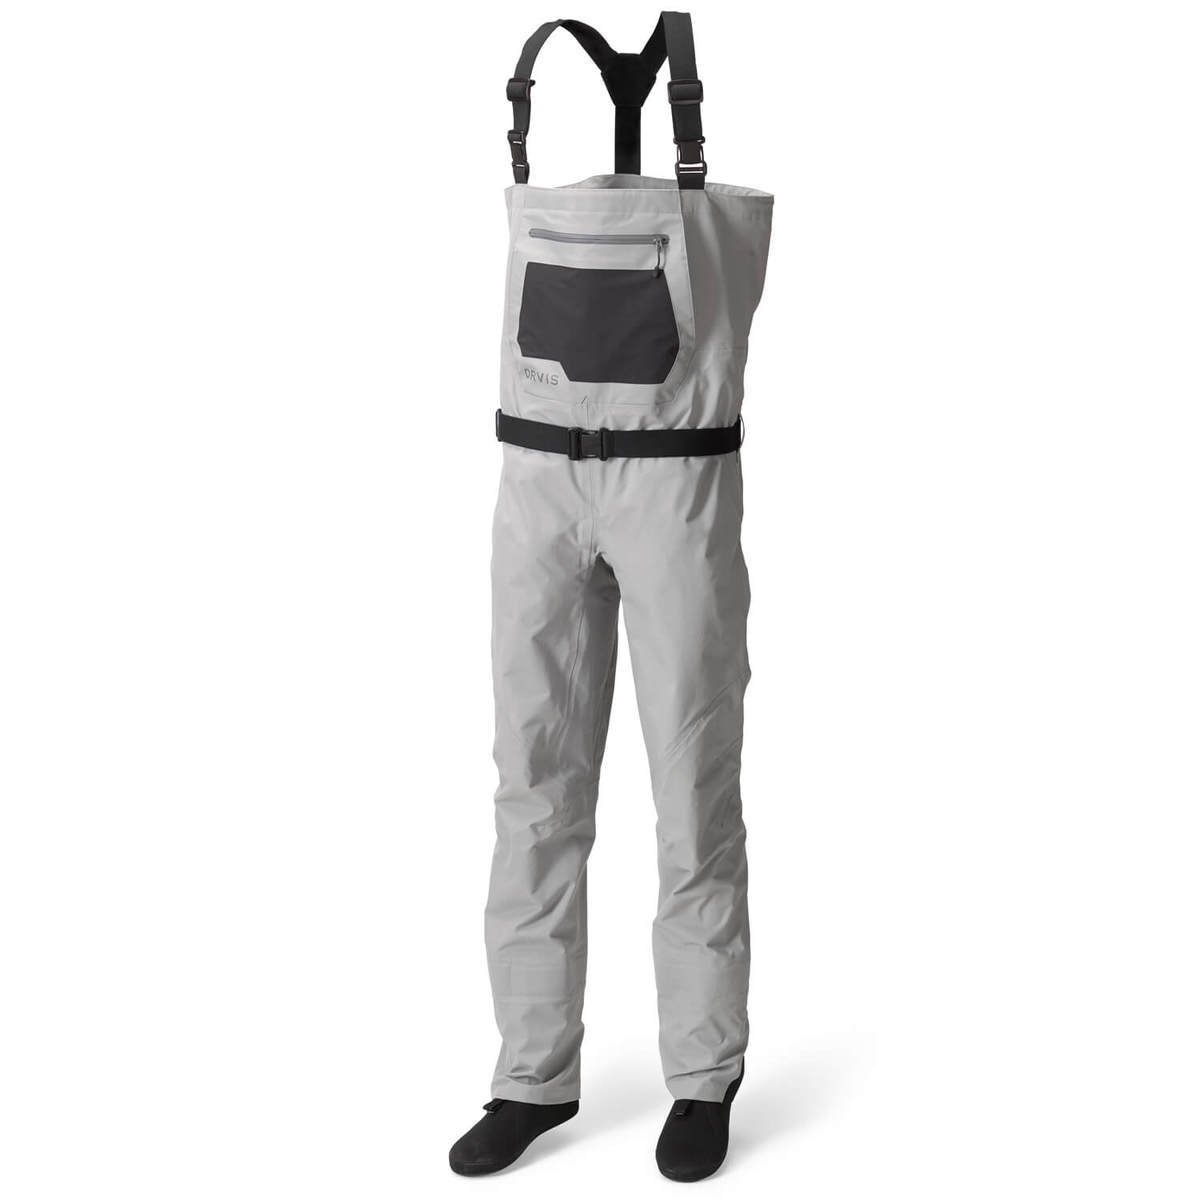 Orvis Men's Clearwater Wader XL